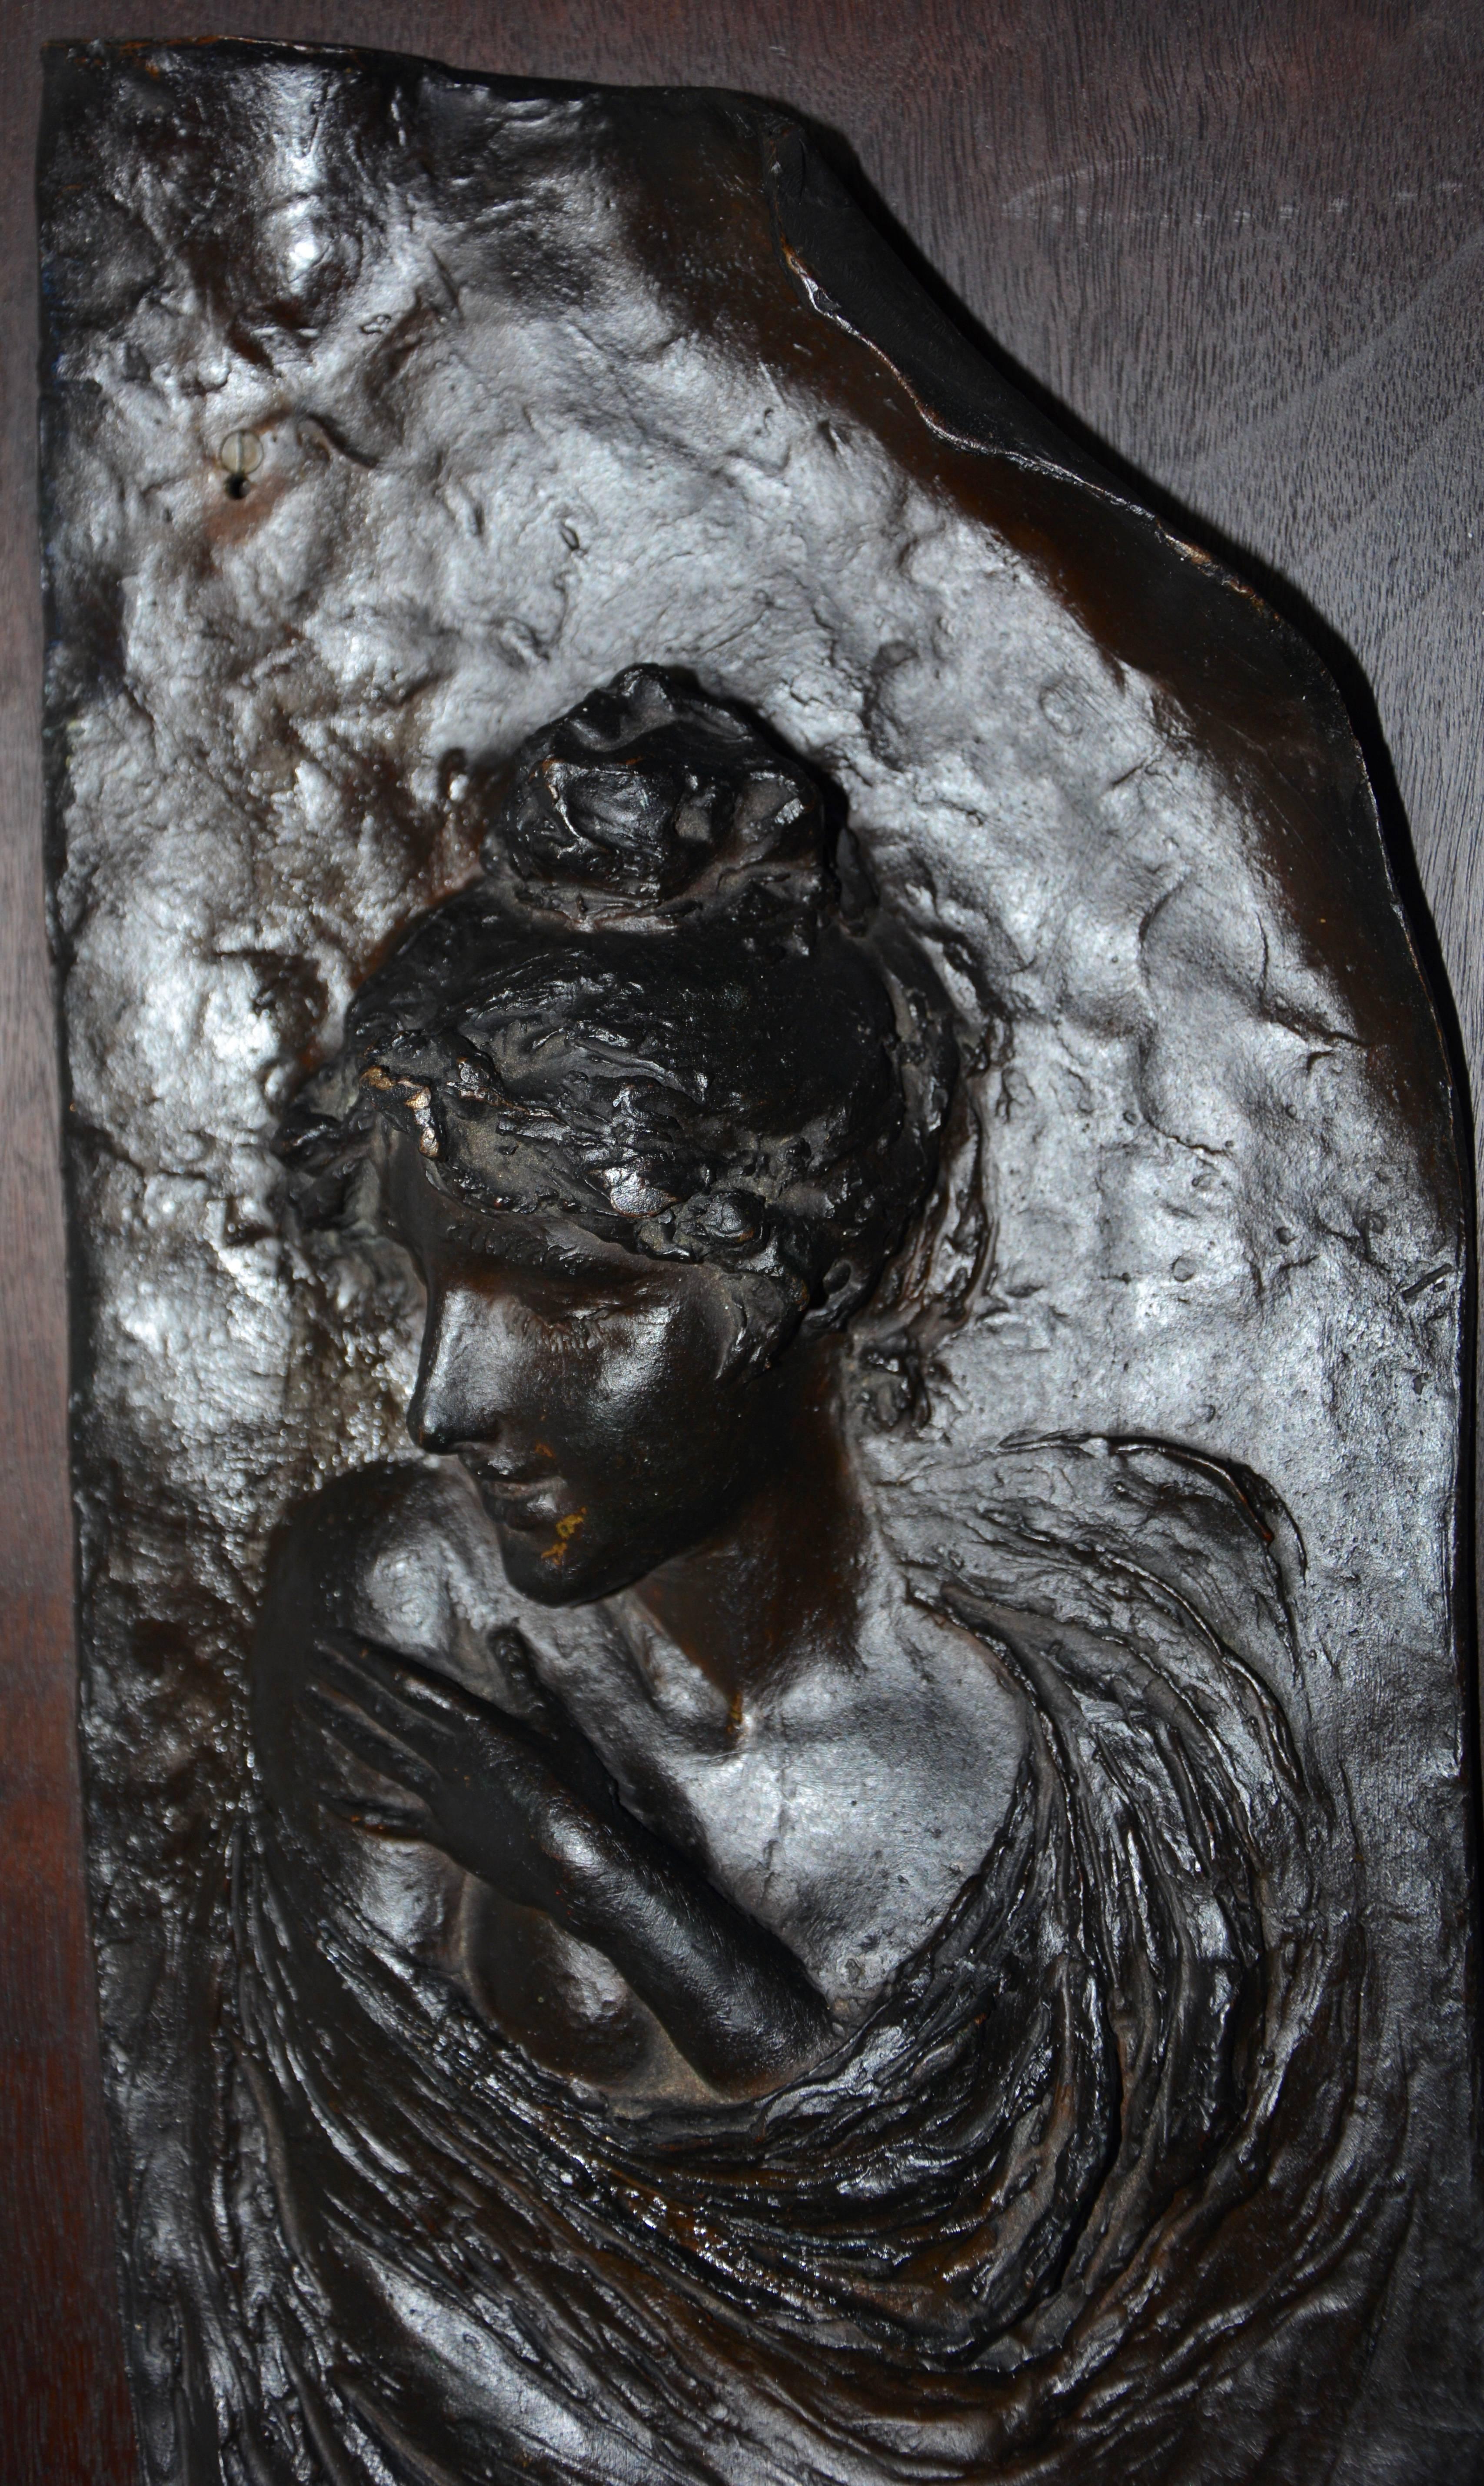 Beauty flows from this bronze of a lady mounted on a wooden plaque. It is marked 